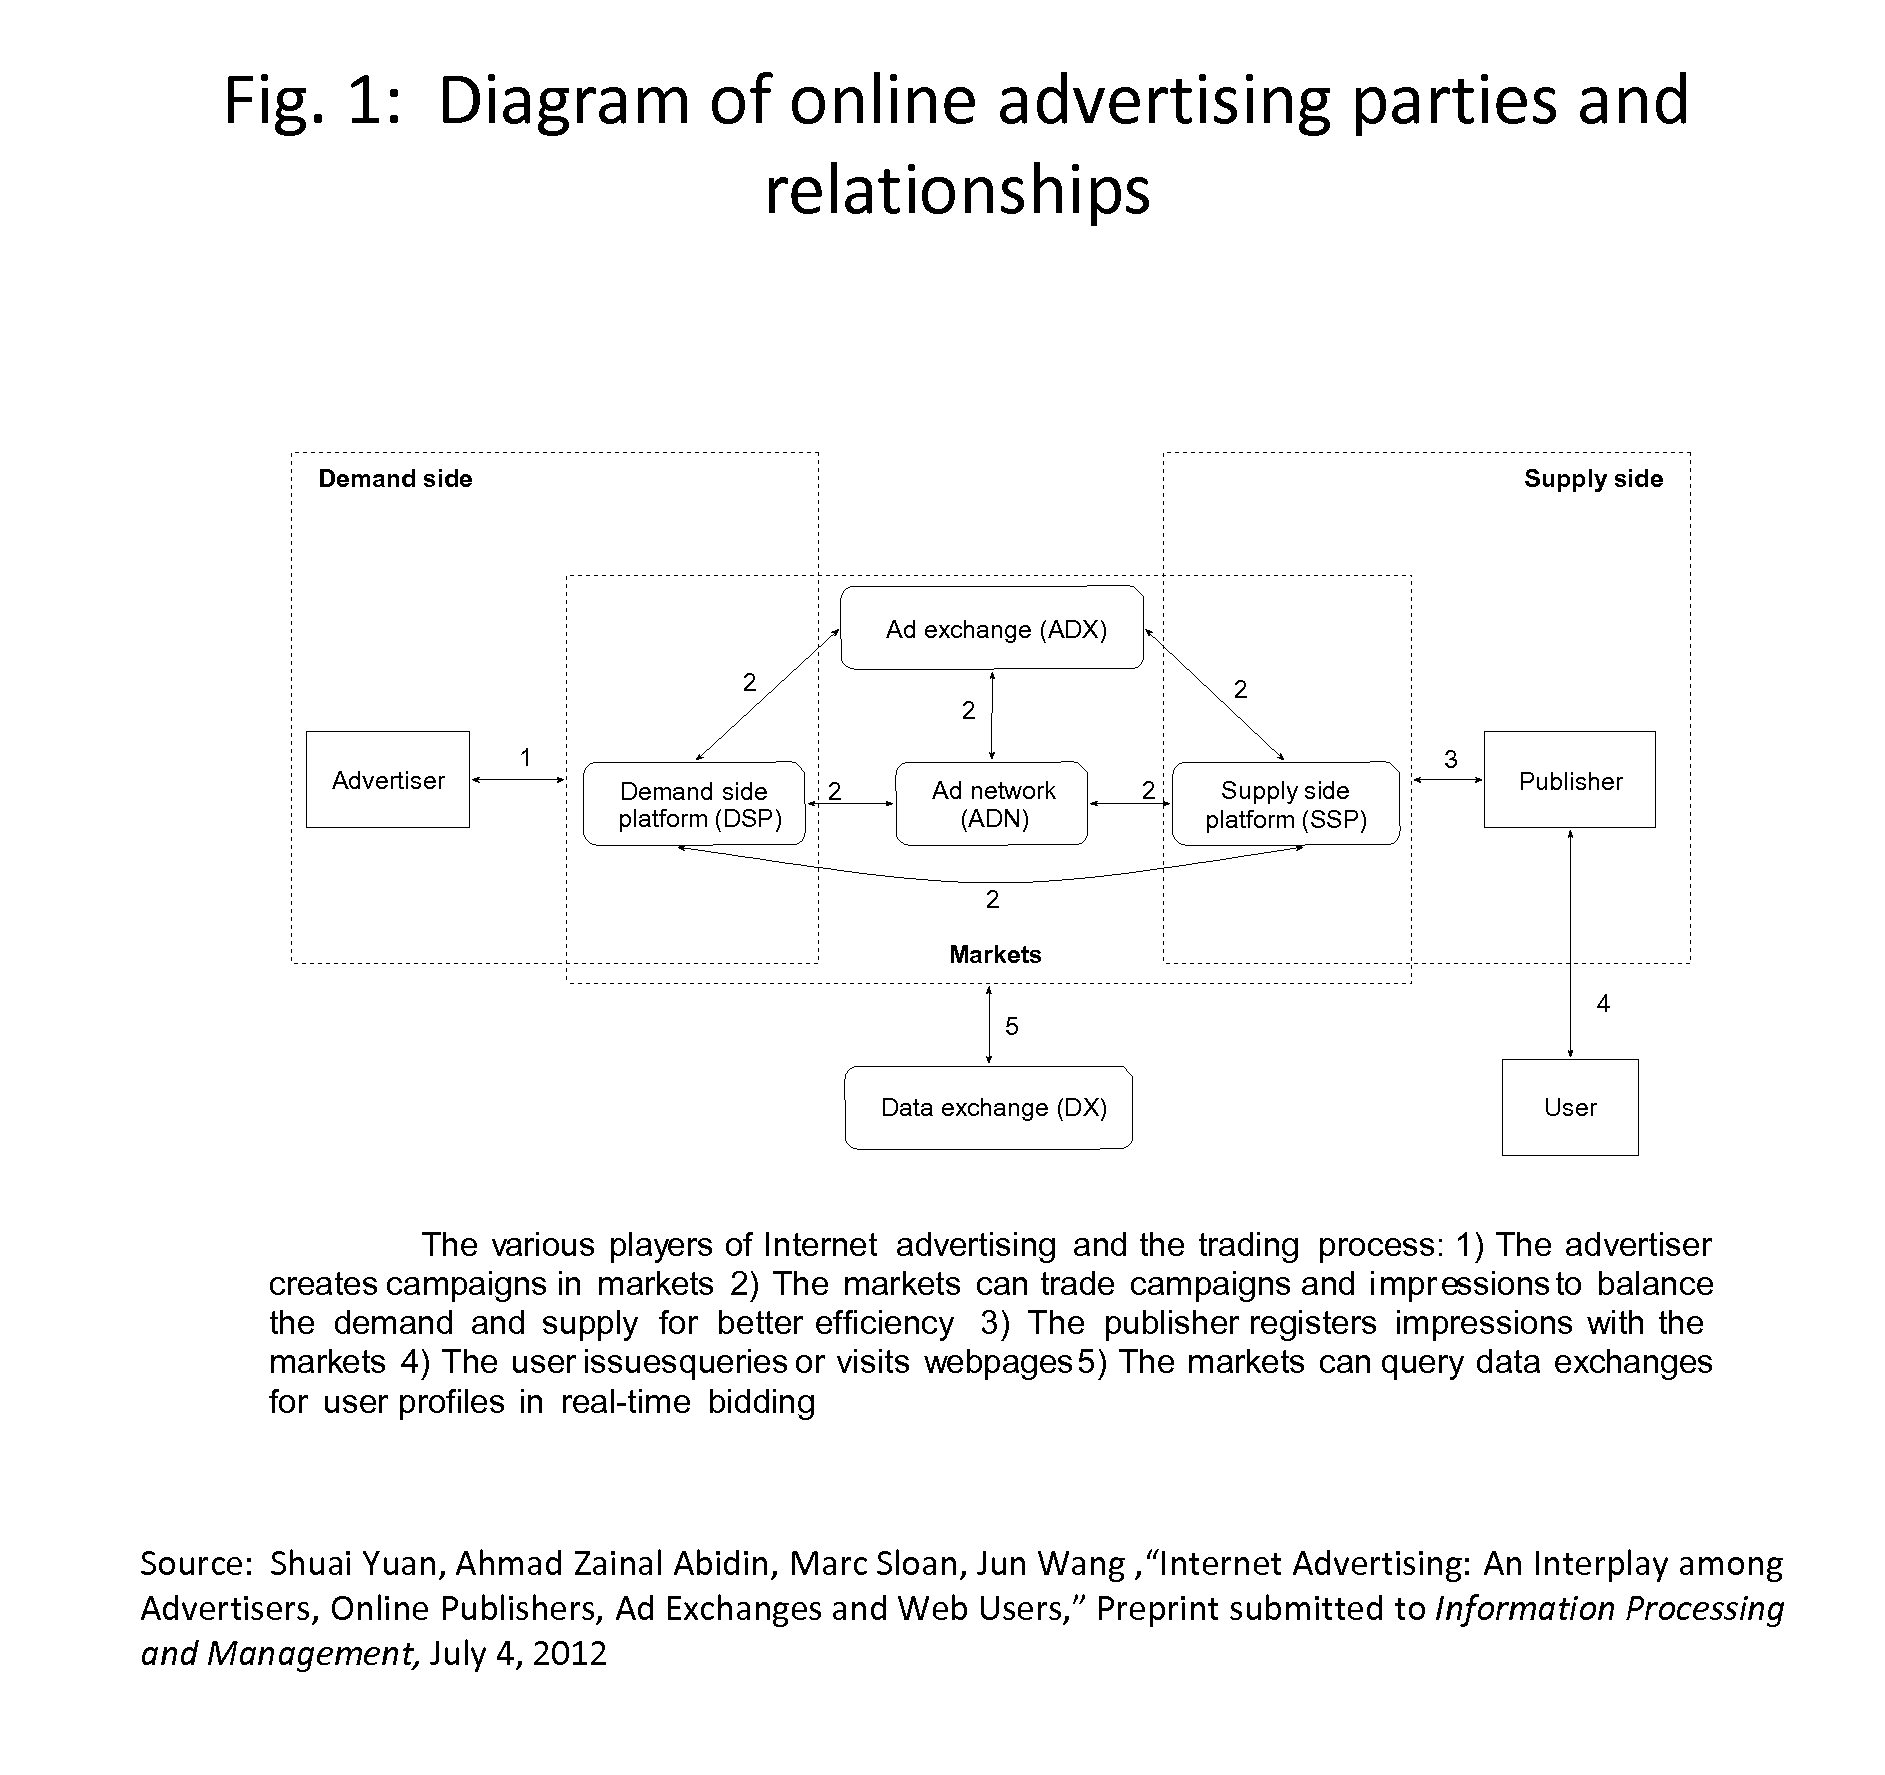 Process to Administer Mandatory Restrictions or Accede to User Preferences in a Distributed, Real-Time Market for Advertising to Mobile and Personal Devices